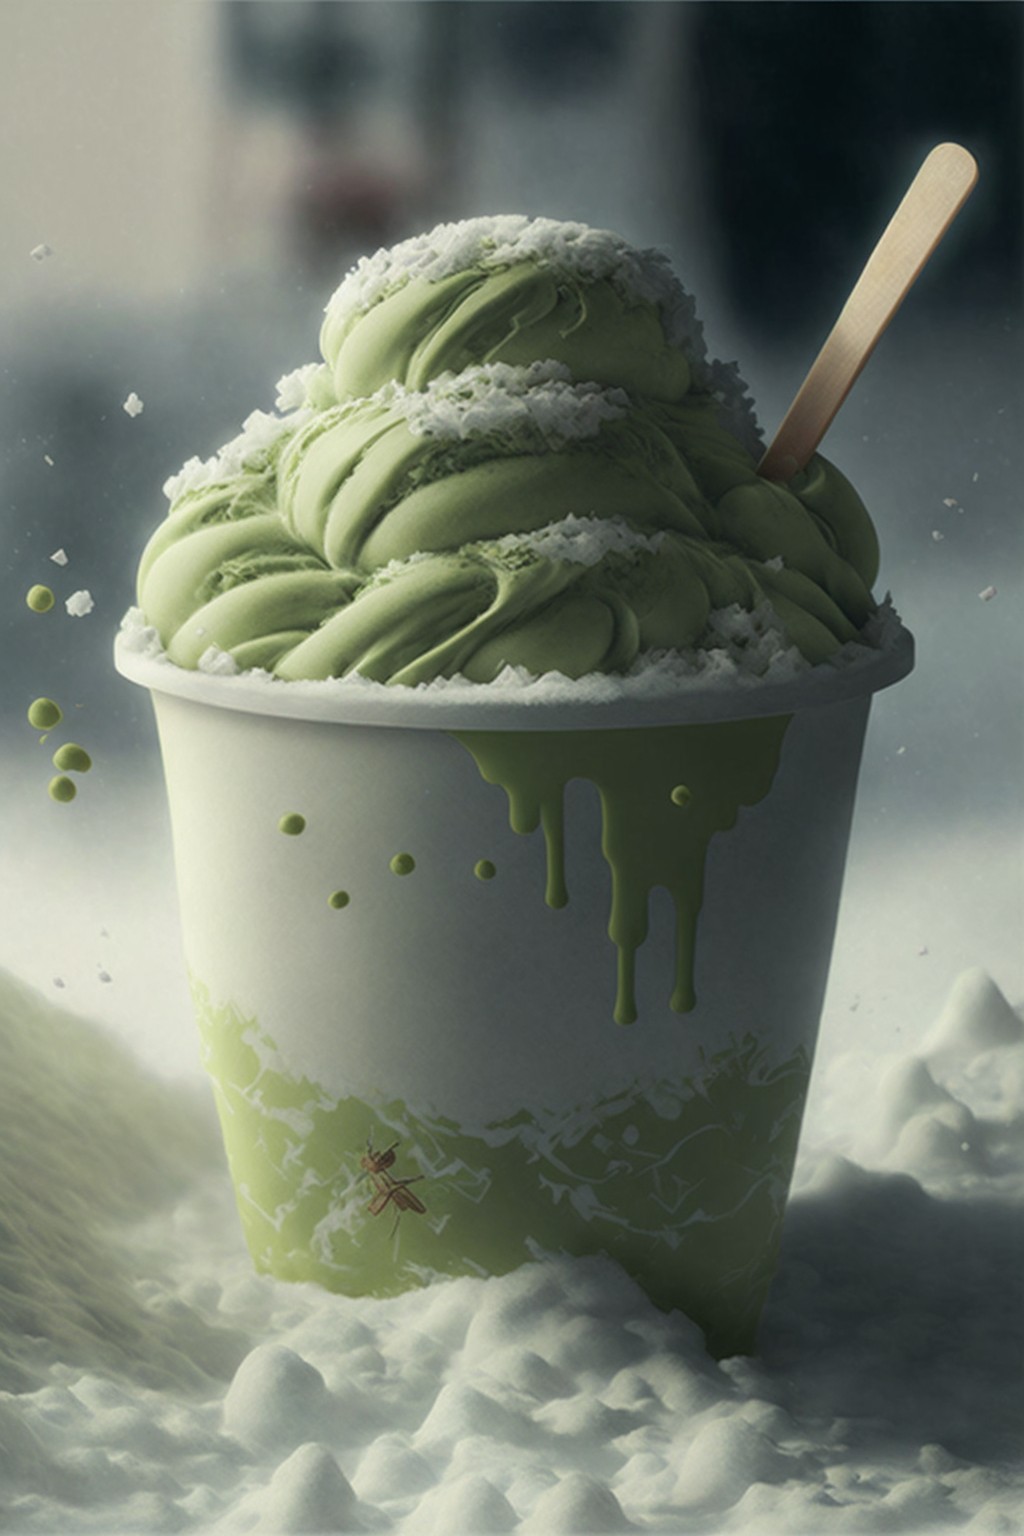 8 images of Green Tea and Green Tea Ice Cream in a Snowstorm by Midjourney